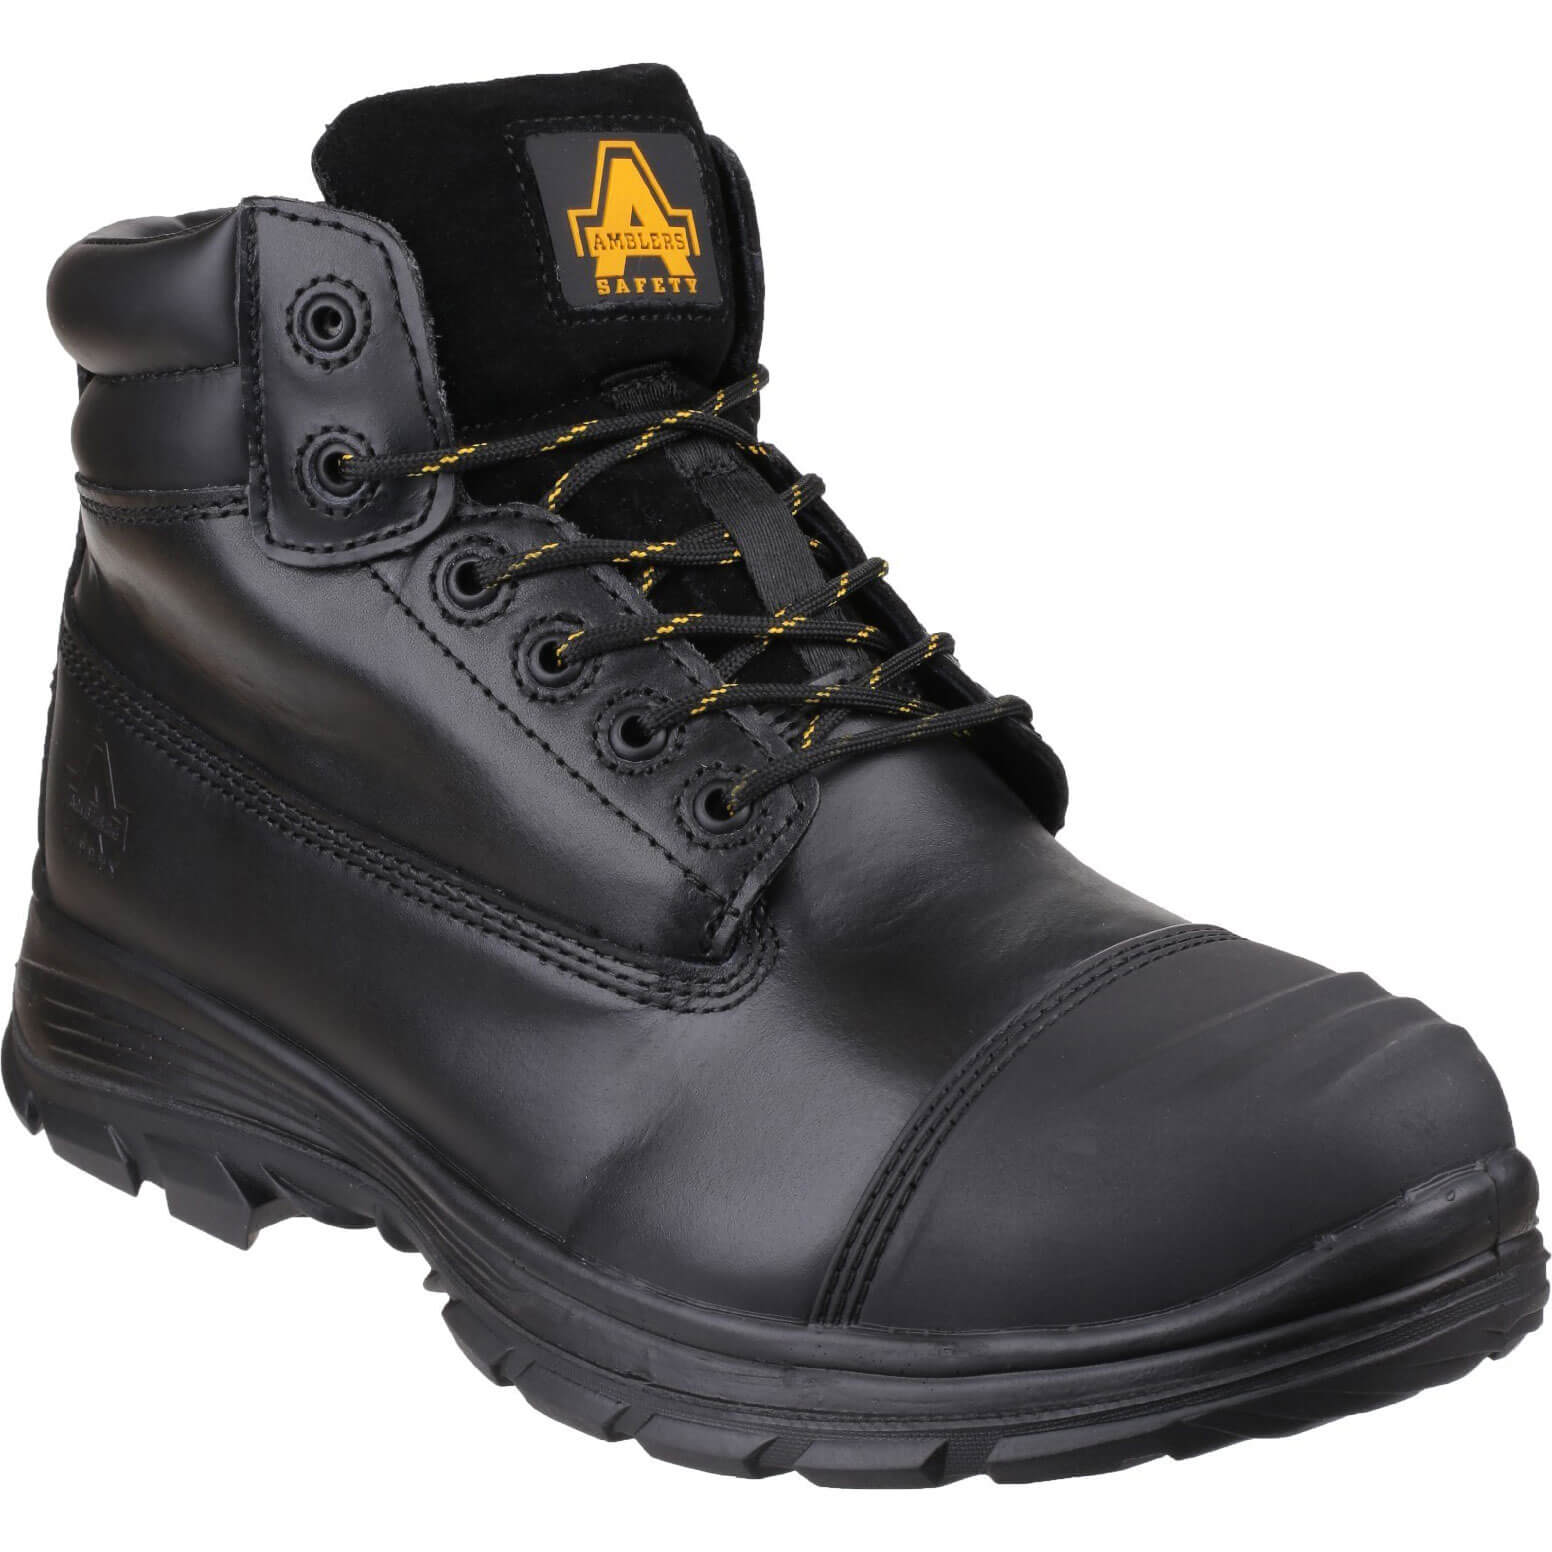 Image of Amblers Mens Safety FS301 Brecon Water Resistant Metatarsal Guard Safety Boots Black Size 11